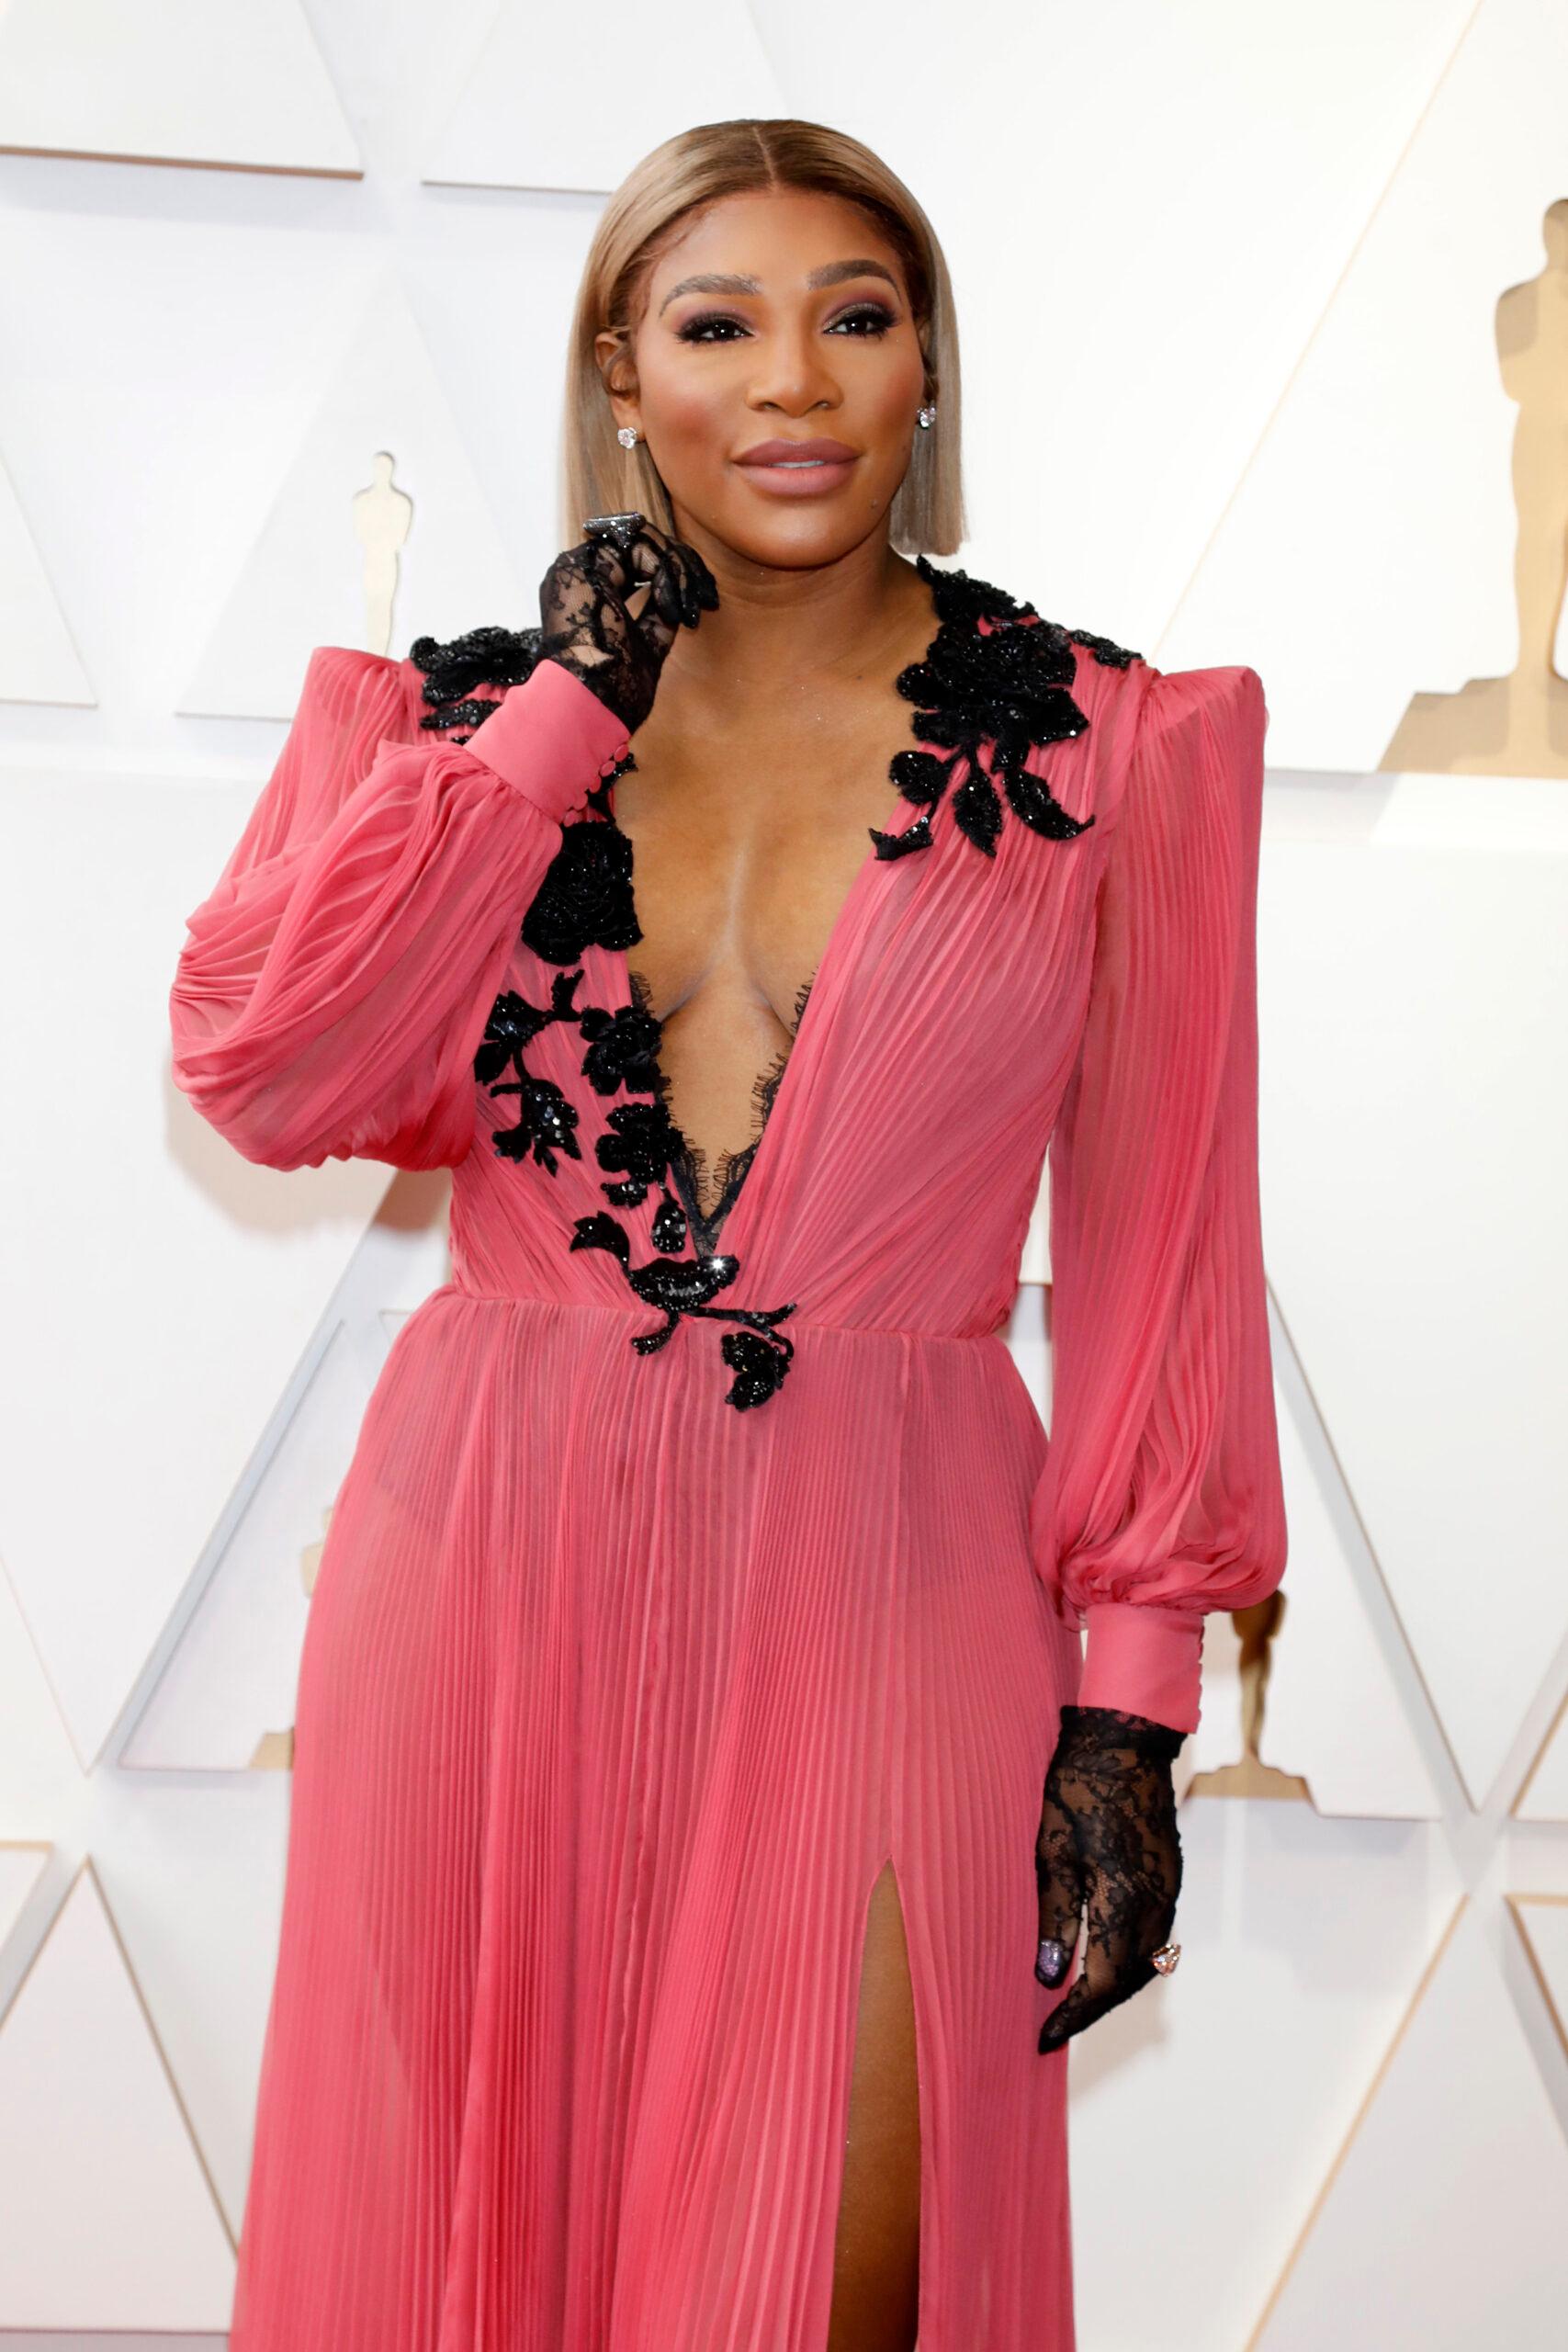 Serena Williams at the 94th Academy Awards - Los Angeles